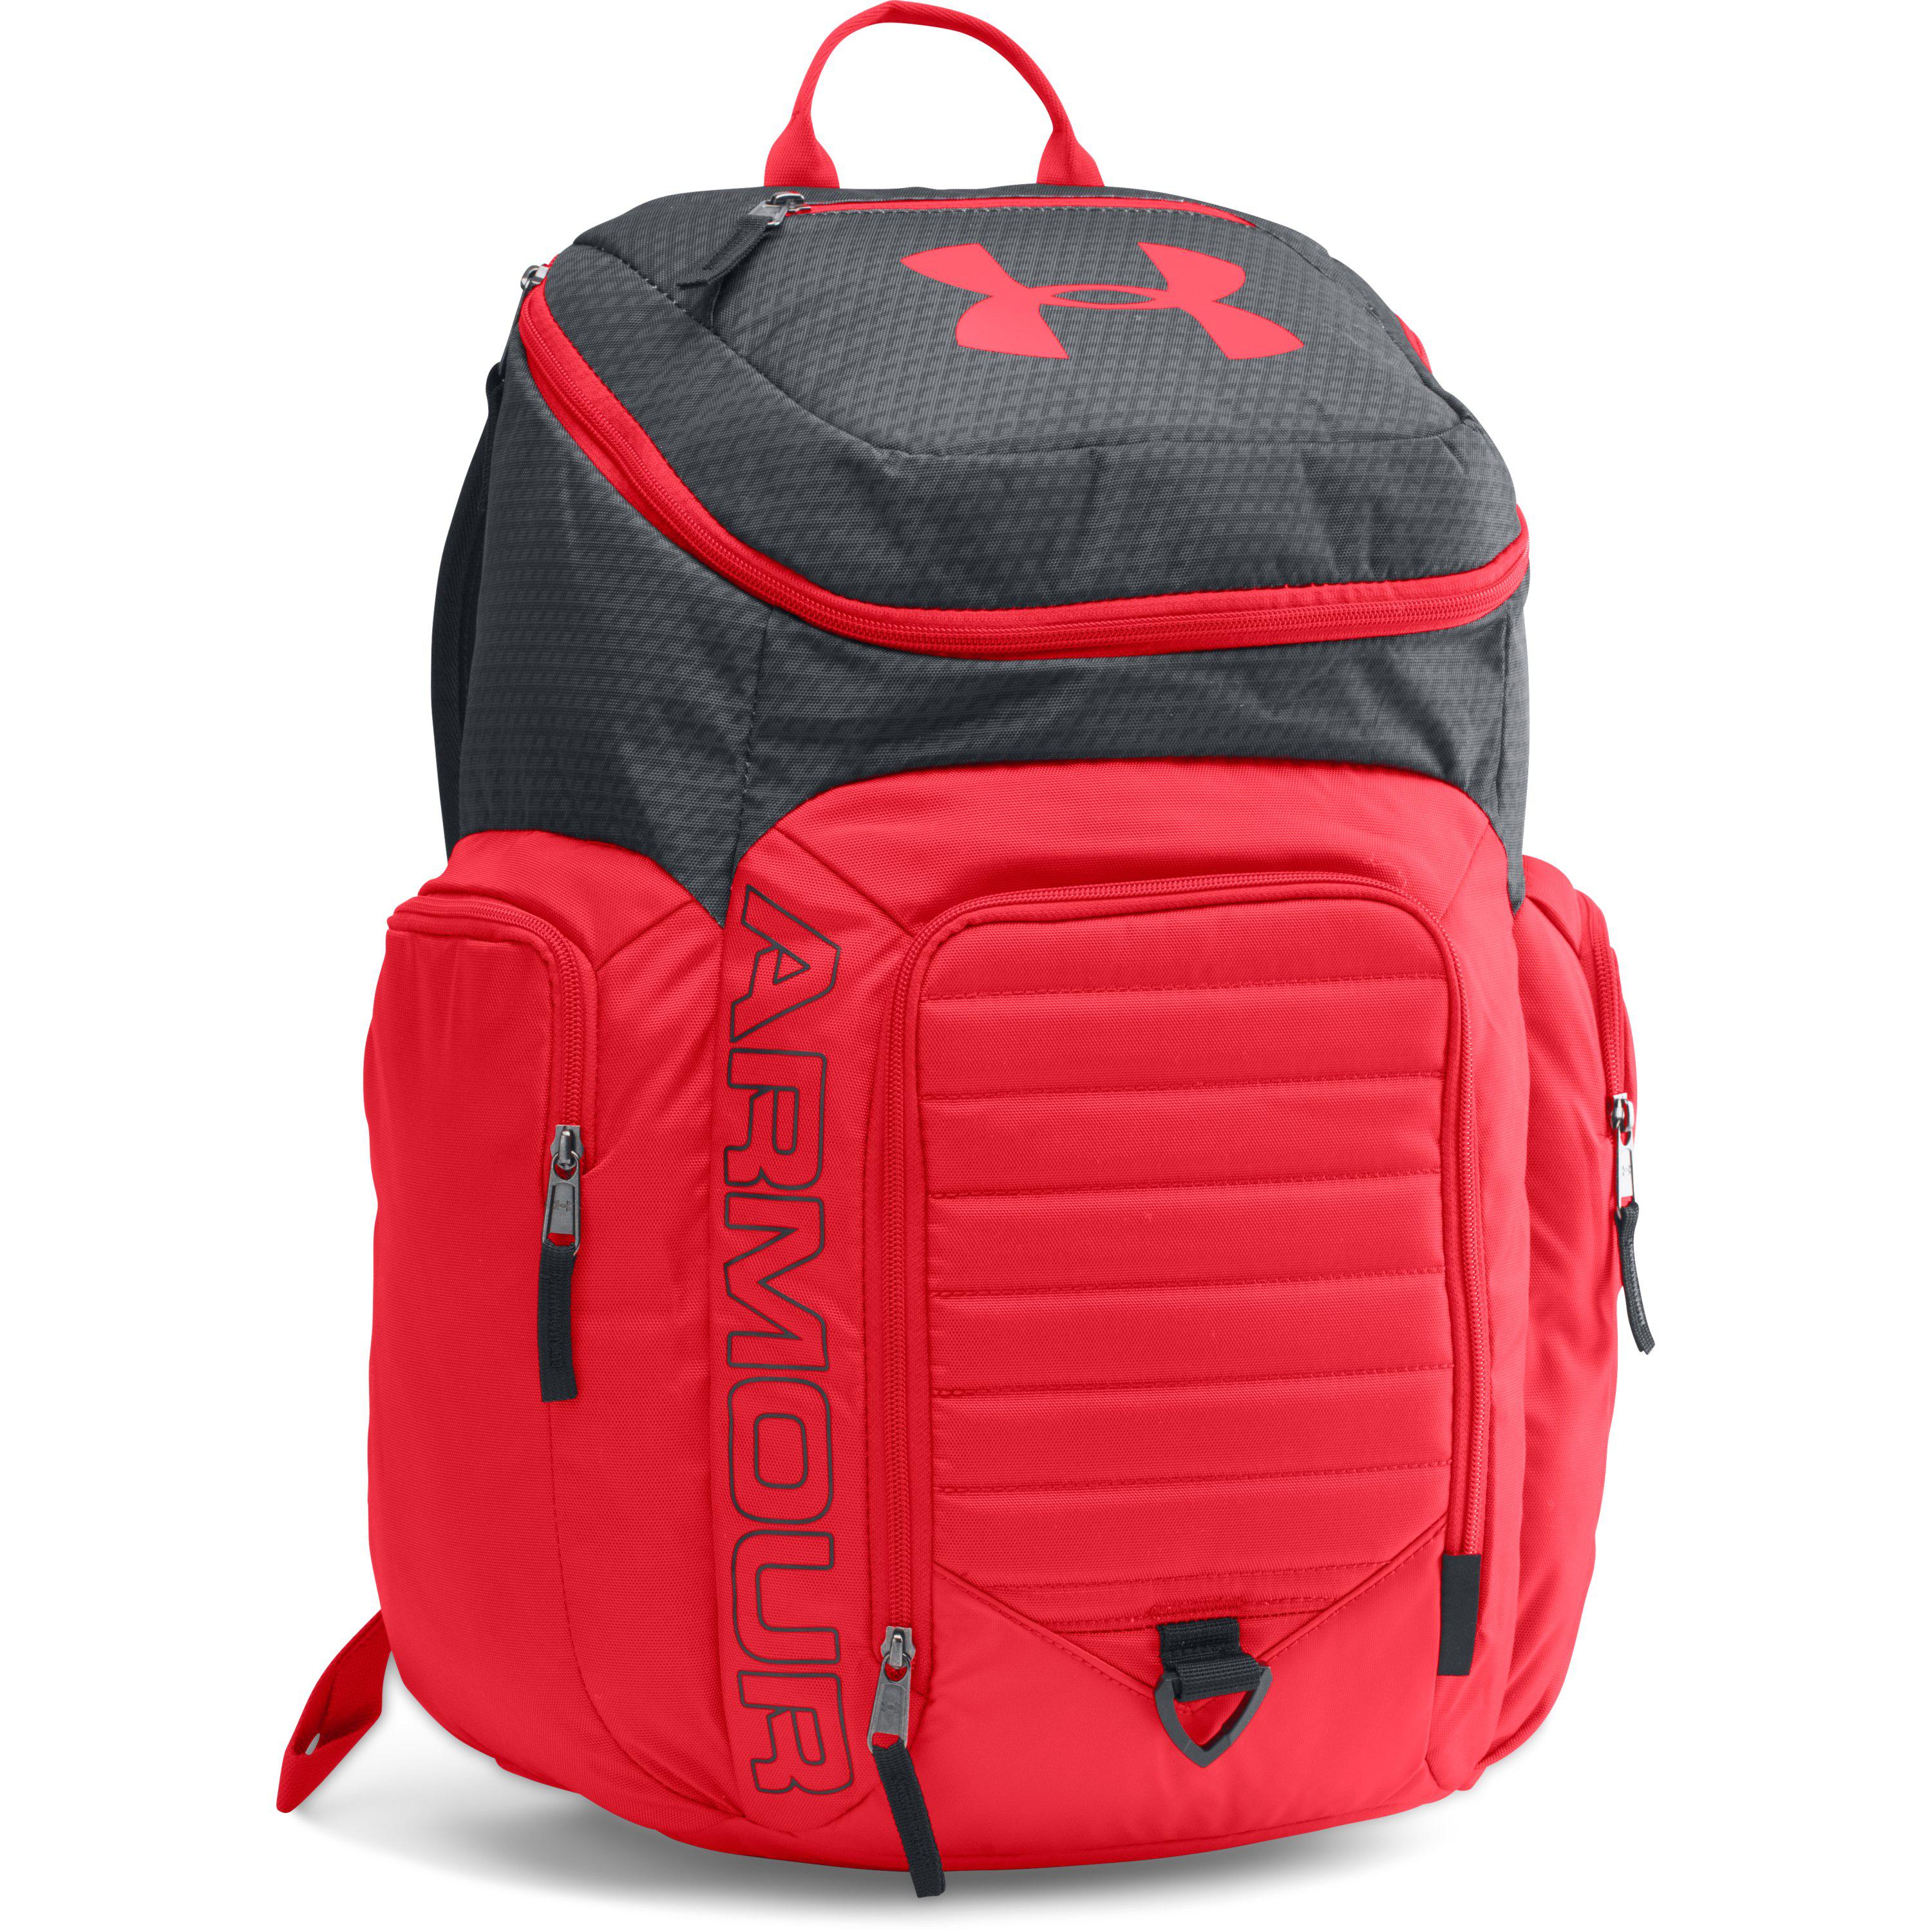 Under Armour Storm Backpack Red Laptop Sleeve Zipped Water Repellent Rucksack UA 